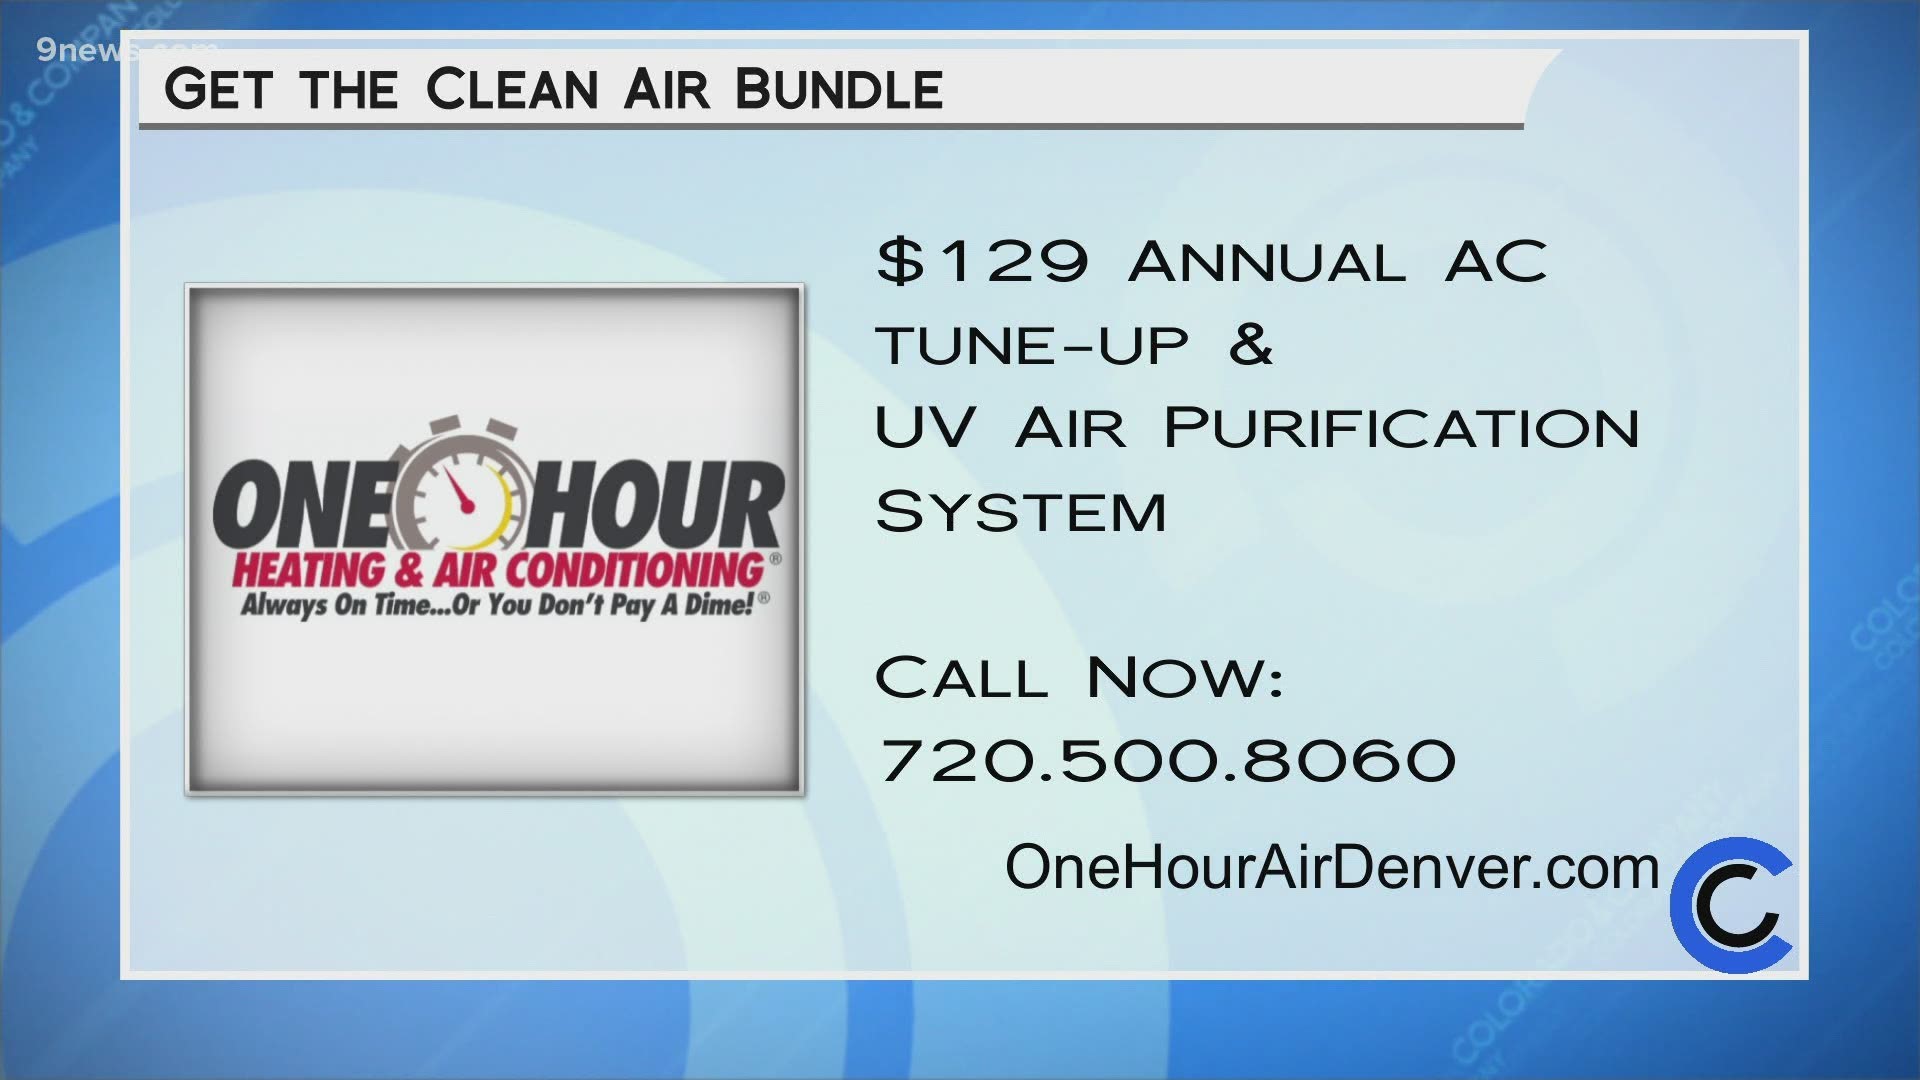 Get the Clean Air bundle for just $129. Learn more and get started today at OneHourAirDenver.com or call 855.ONE.HOUR.